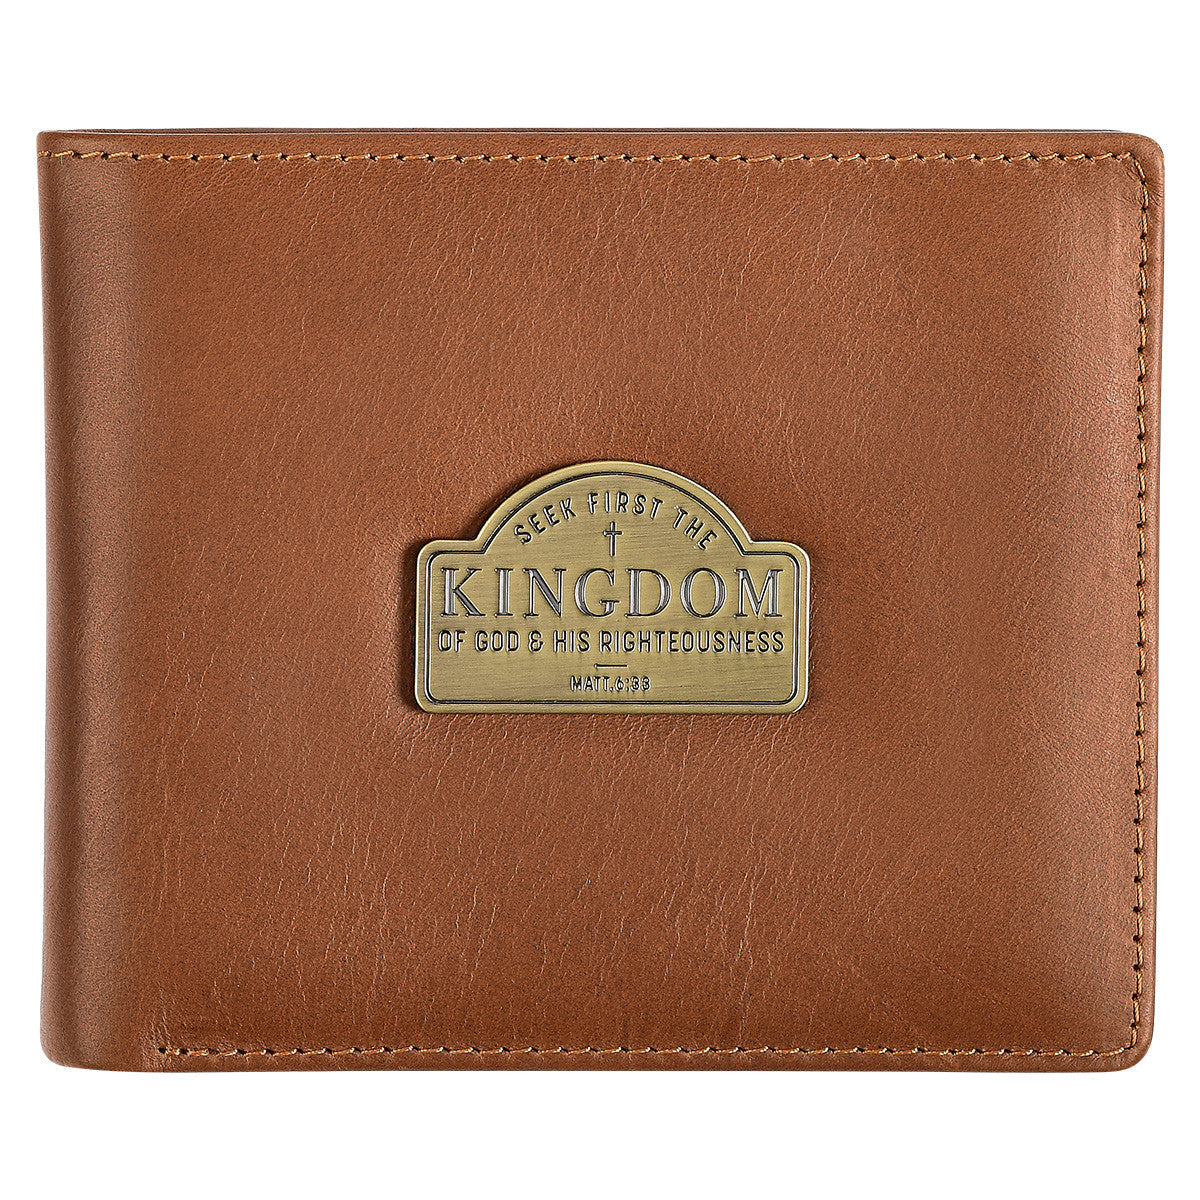 Seek First the Kingdom Saddle Tan Genuine Leather Wallet - Matthew 6:33 - The Christian Gift Company